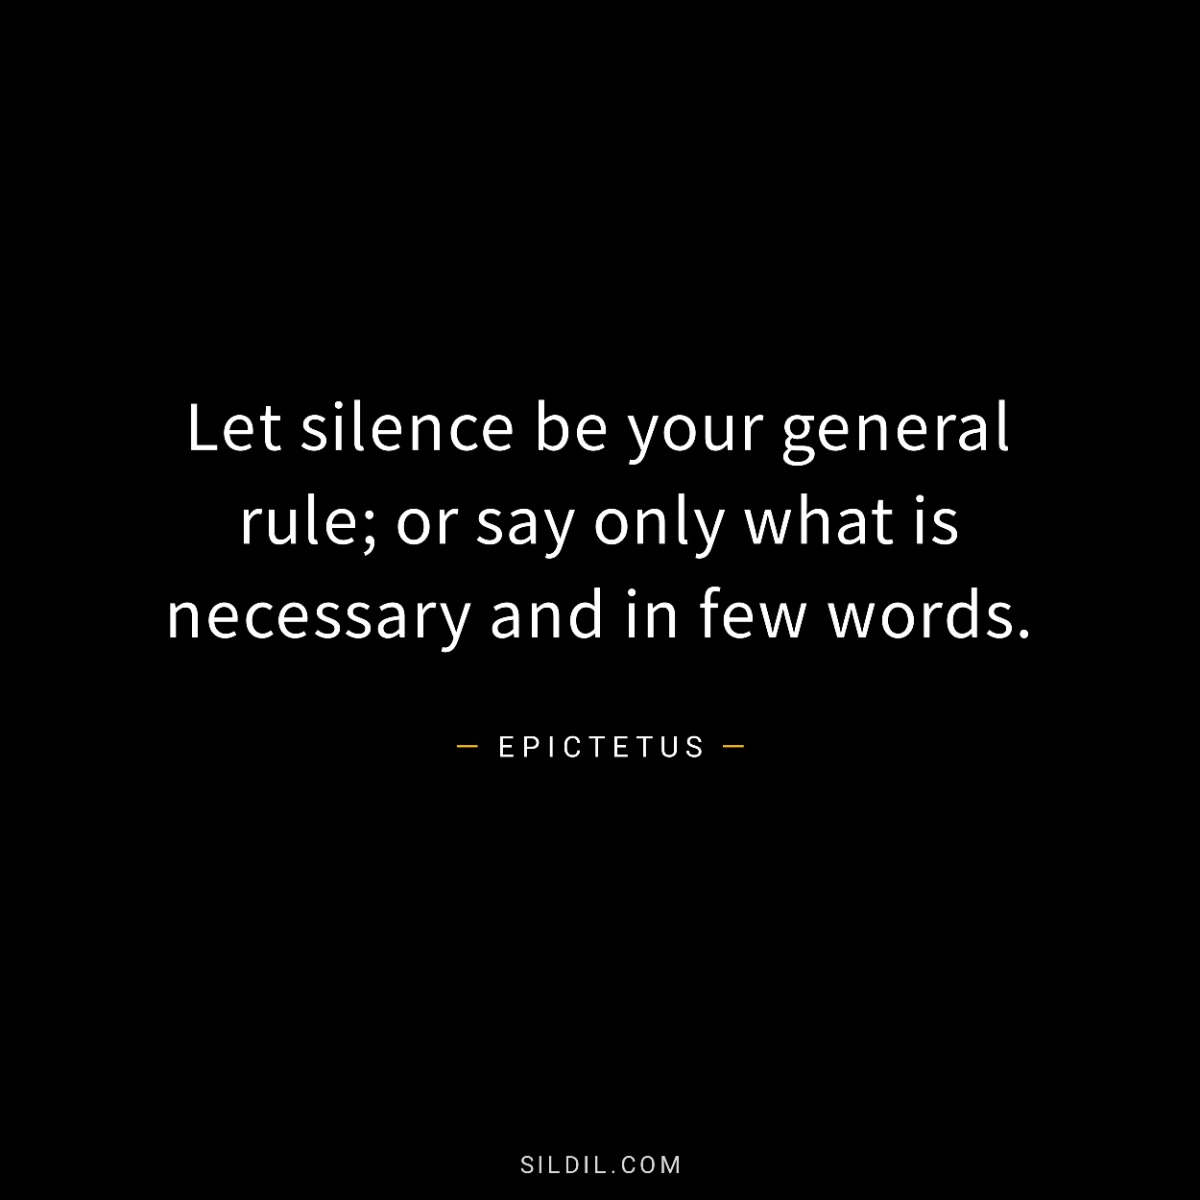 Let silence be your general rule; or say only what is necessary and in few words.